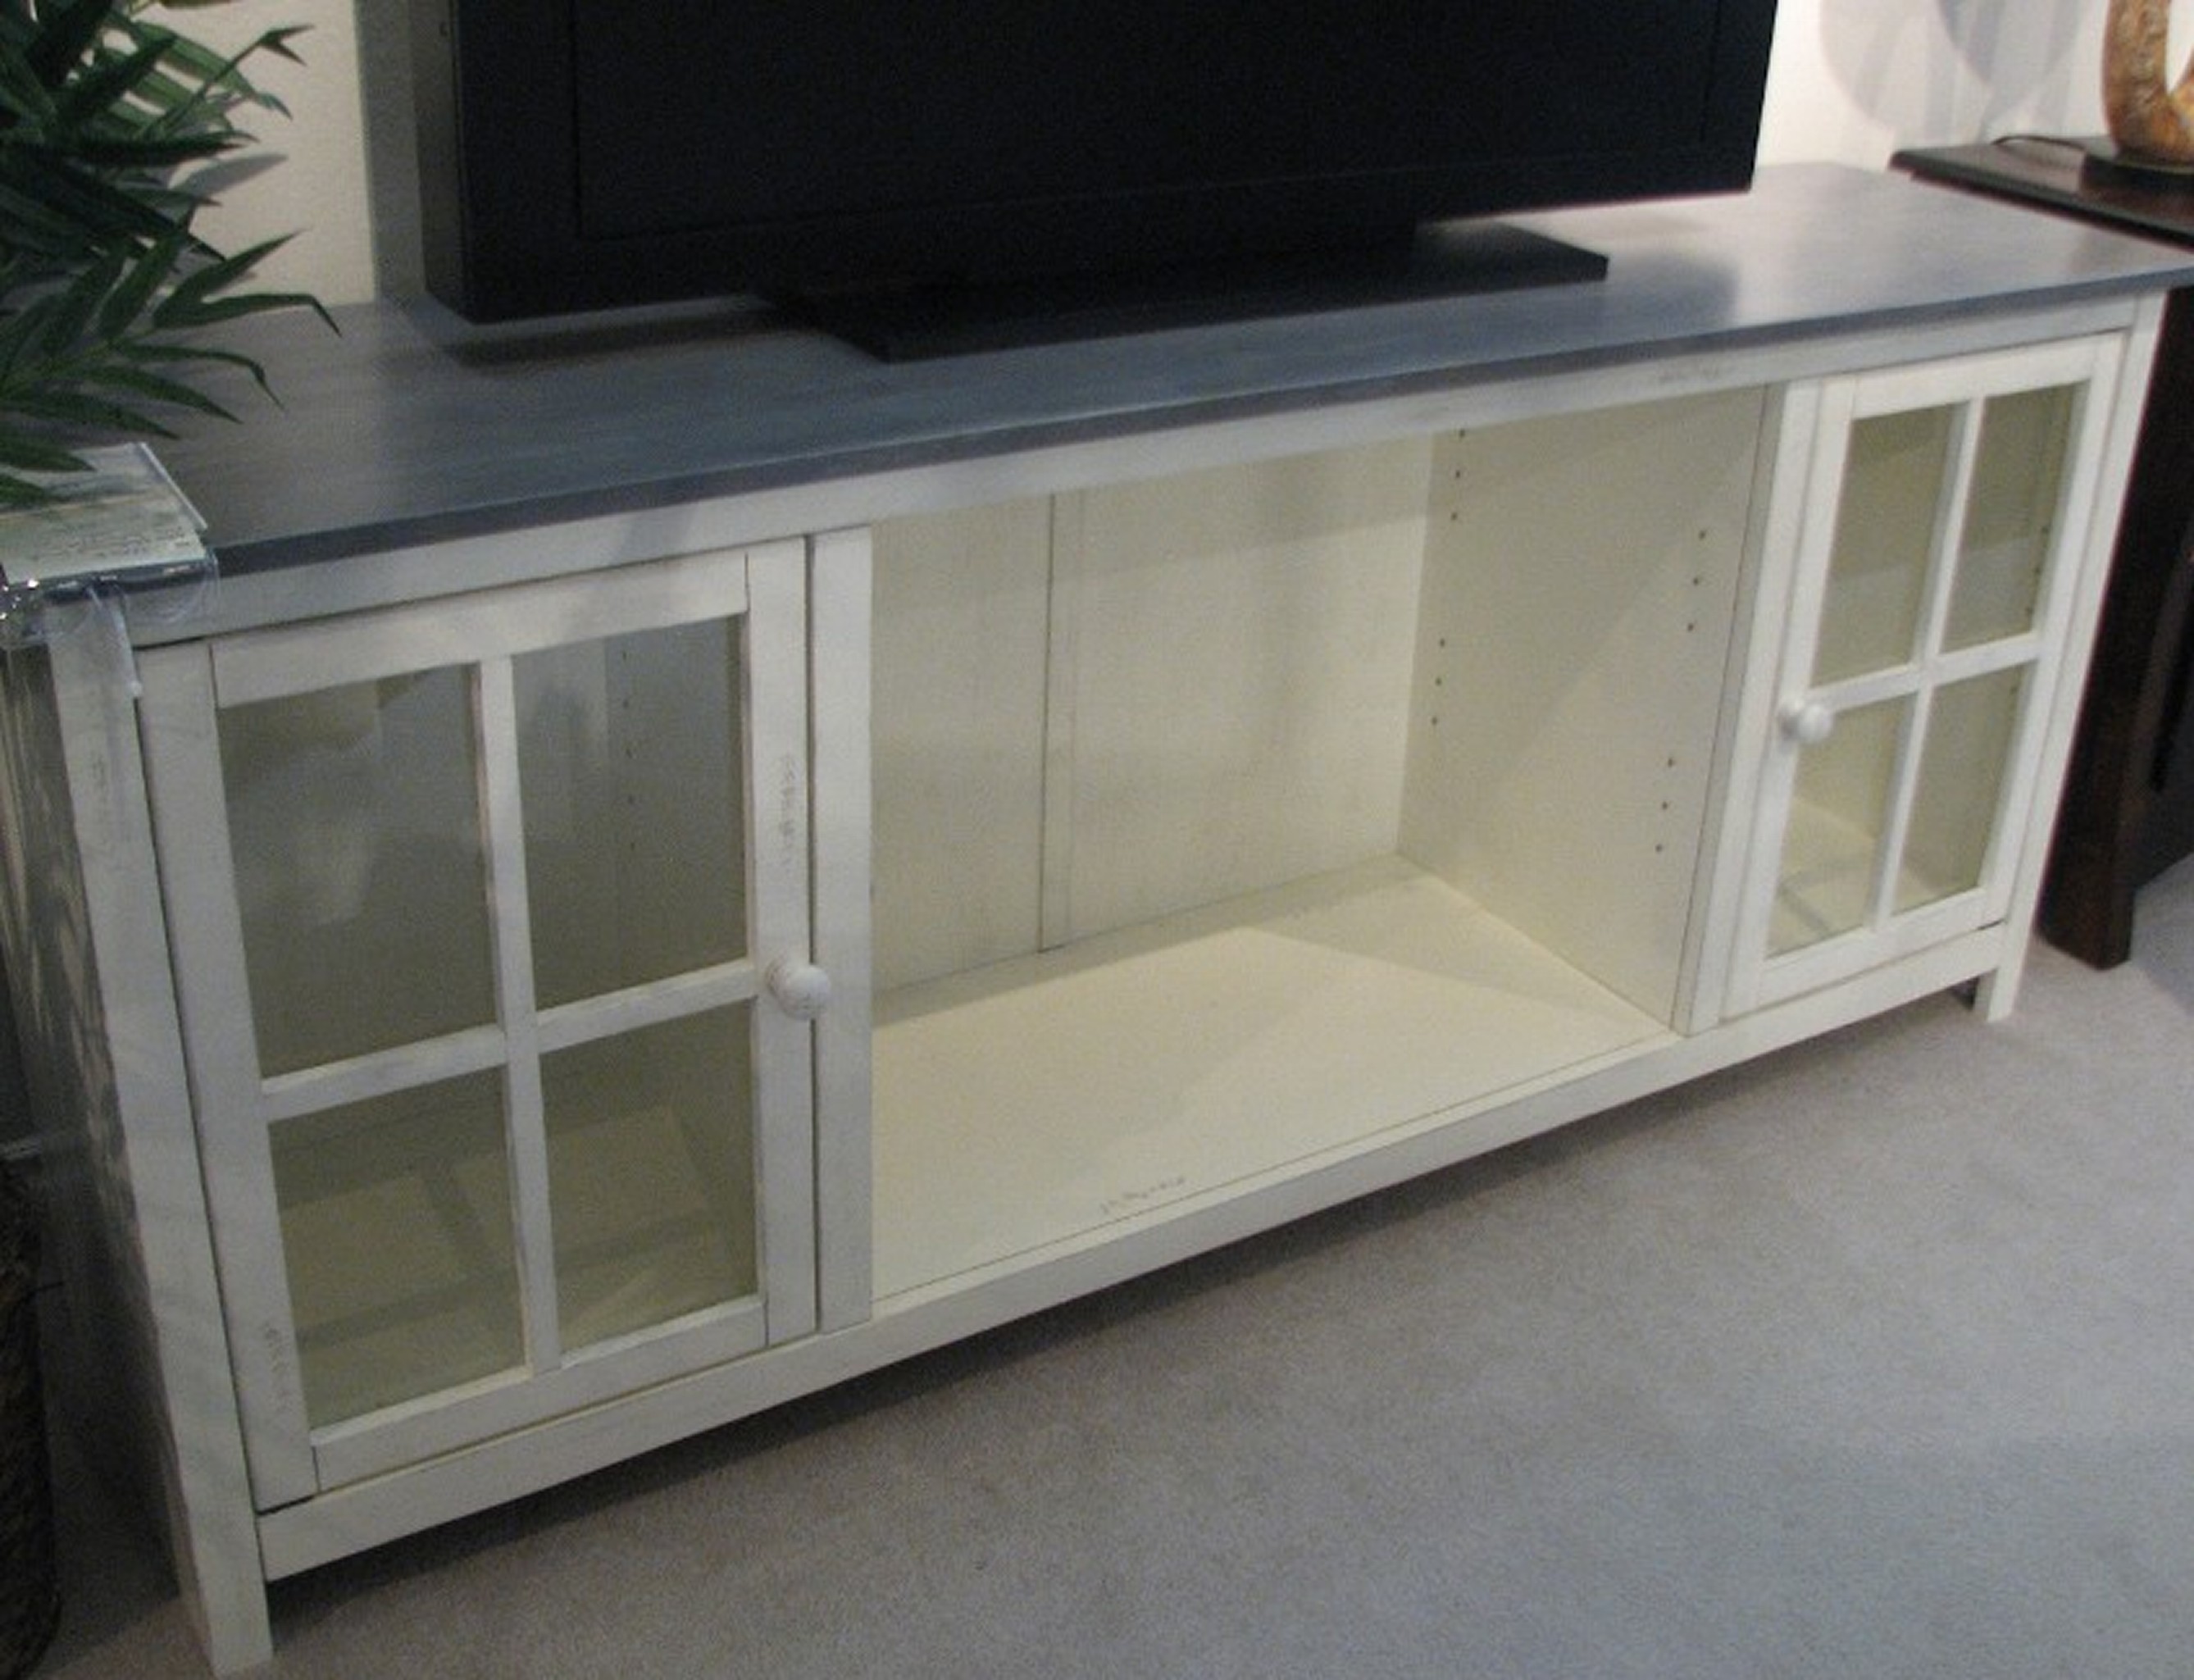 Considering Designs for Wall Units And Entertainment Centers in Kalamazoo